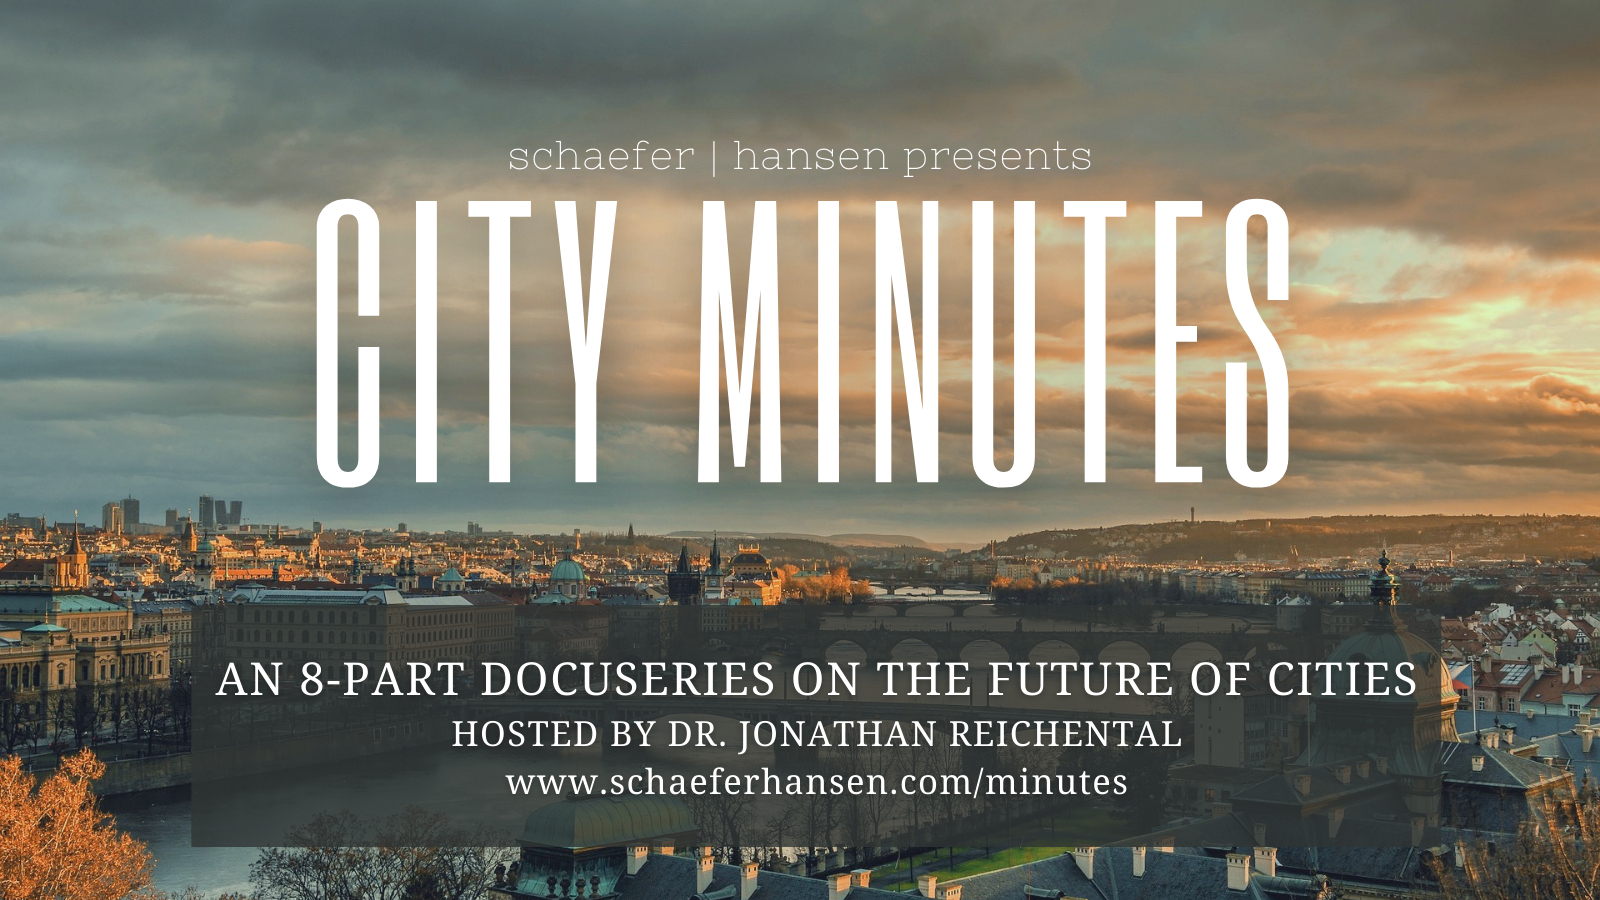 VIDEO: City Minutes Is Now Streaming